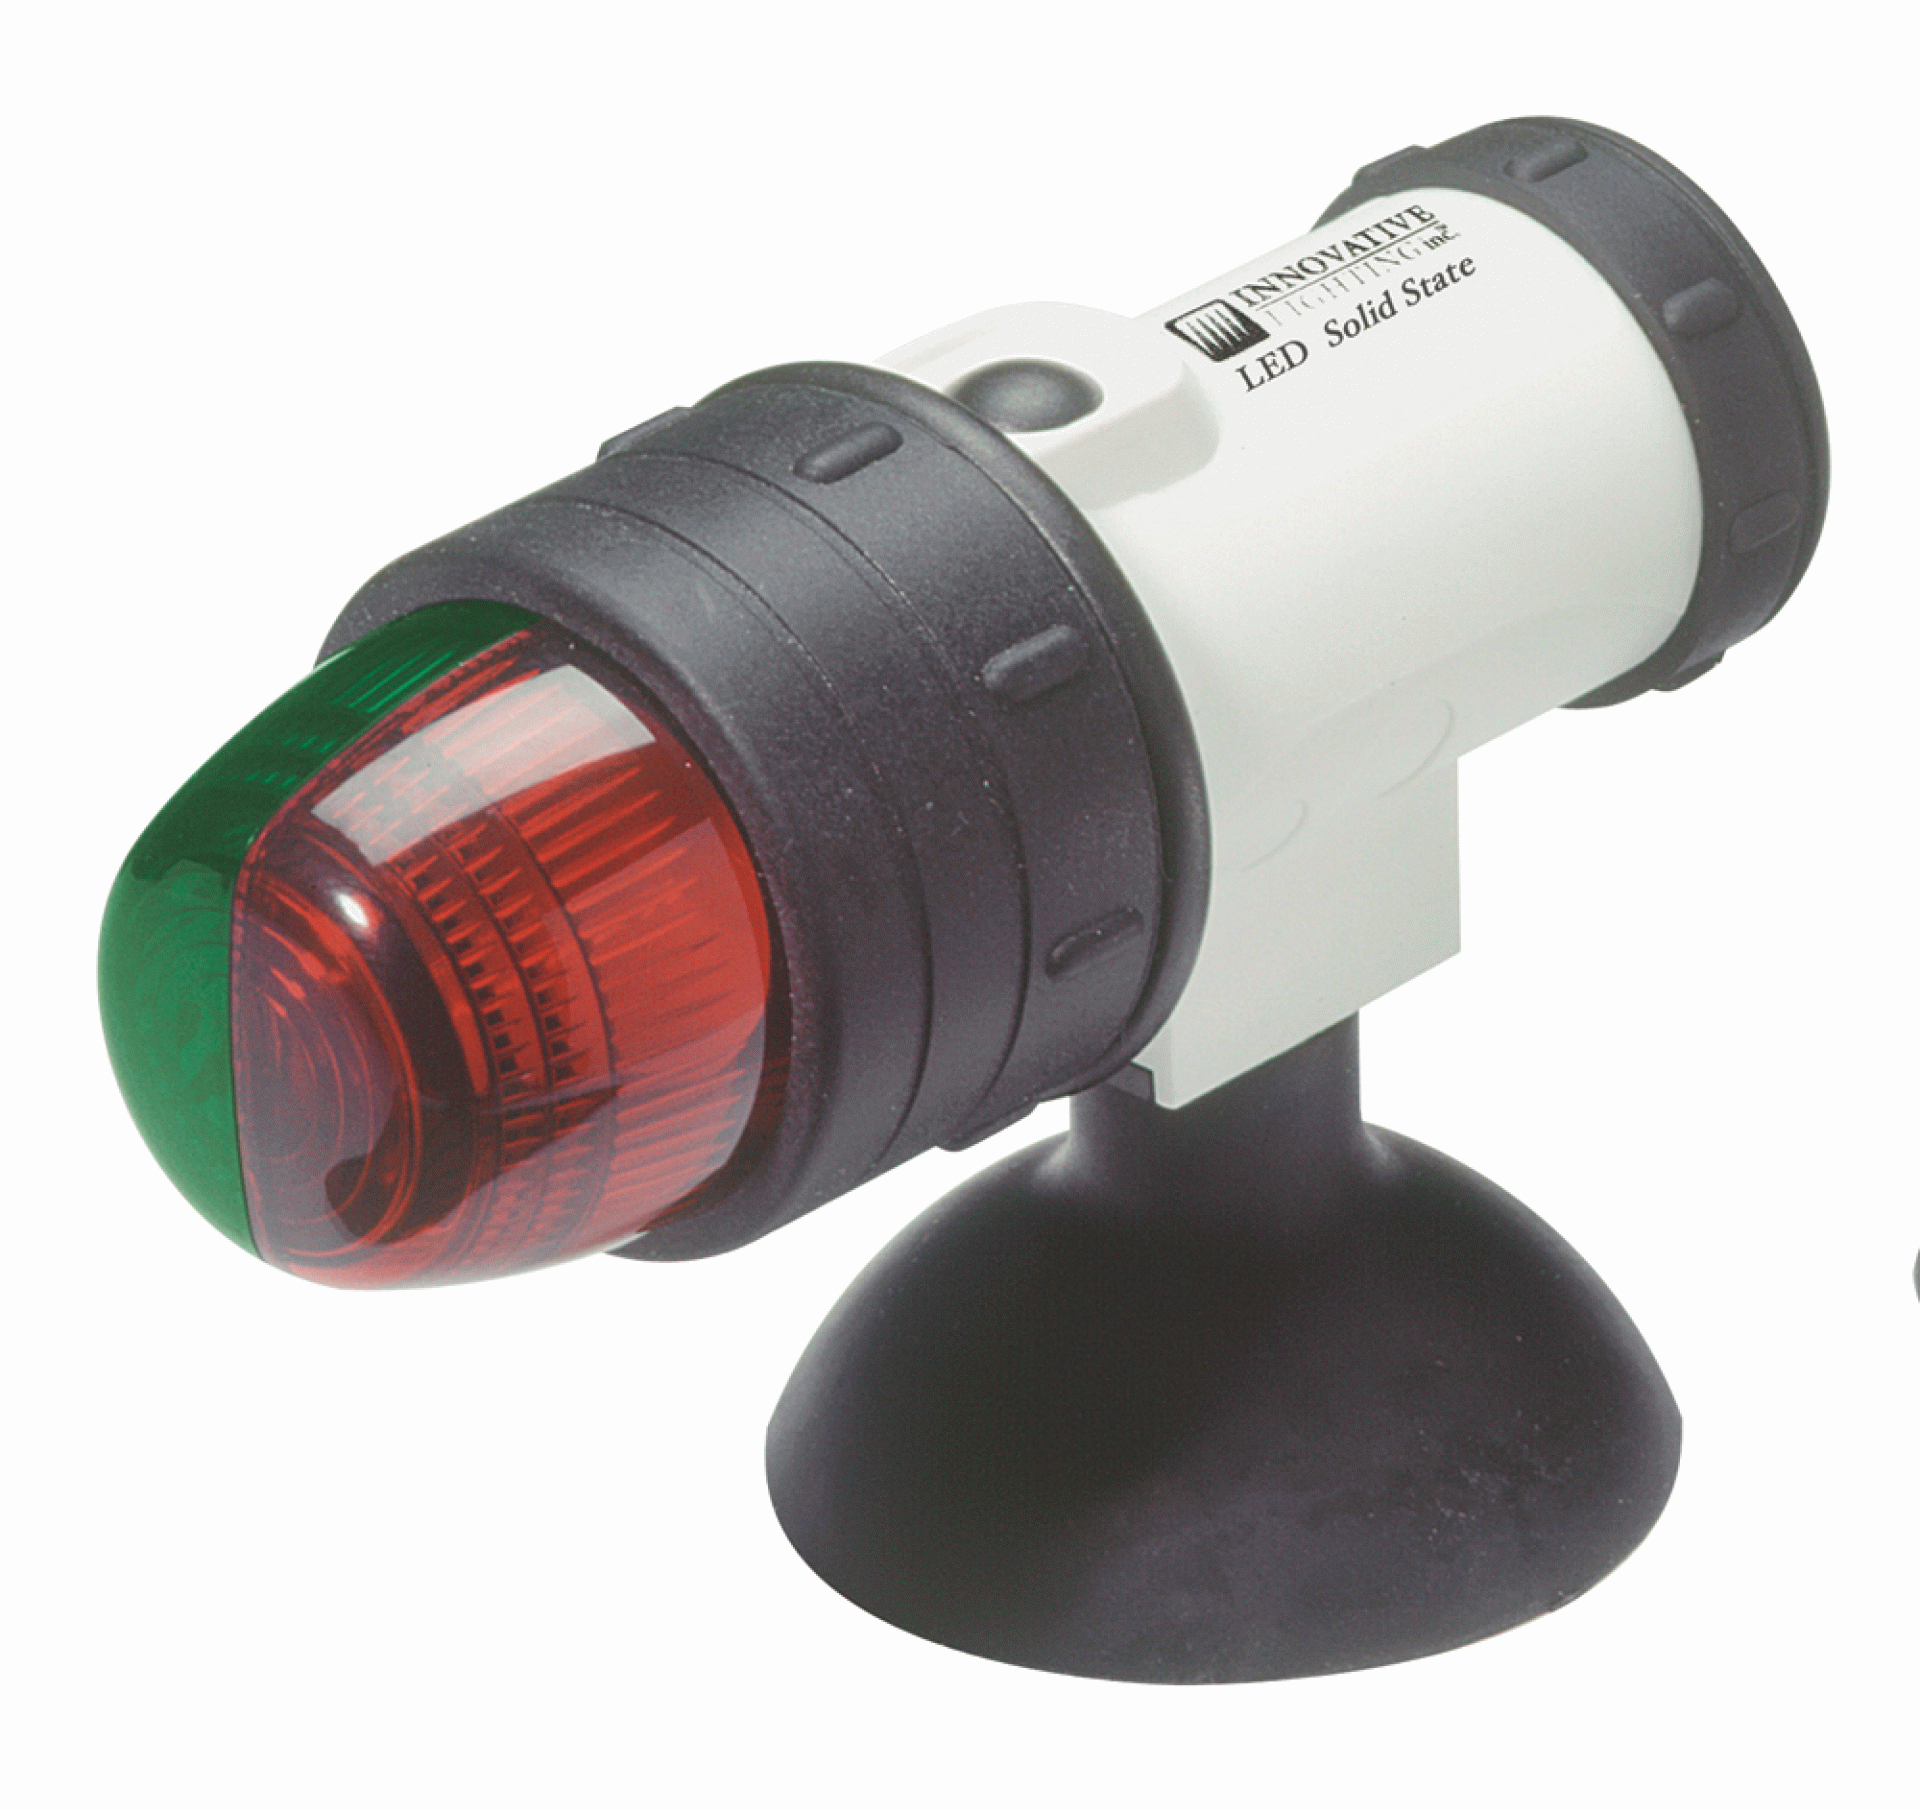 INNOVATIVE LIGHTING INC. | 560-1110-7 | LIGHT BOW LED PORTABLE WITH SCREW ON OFF SUCTION CUP